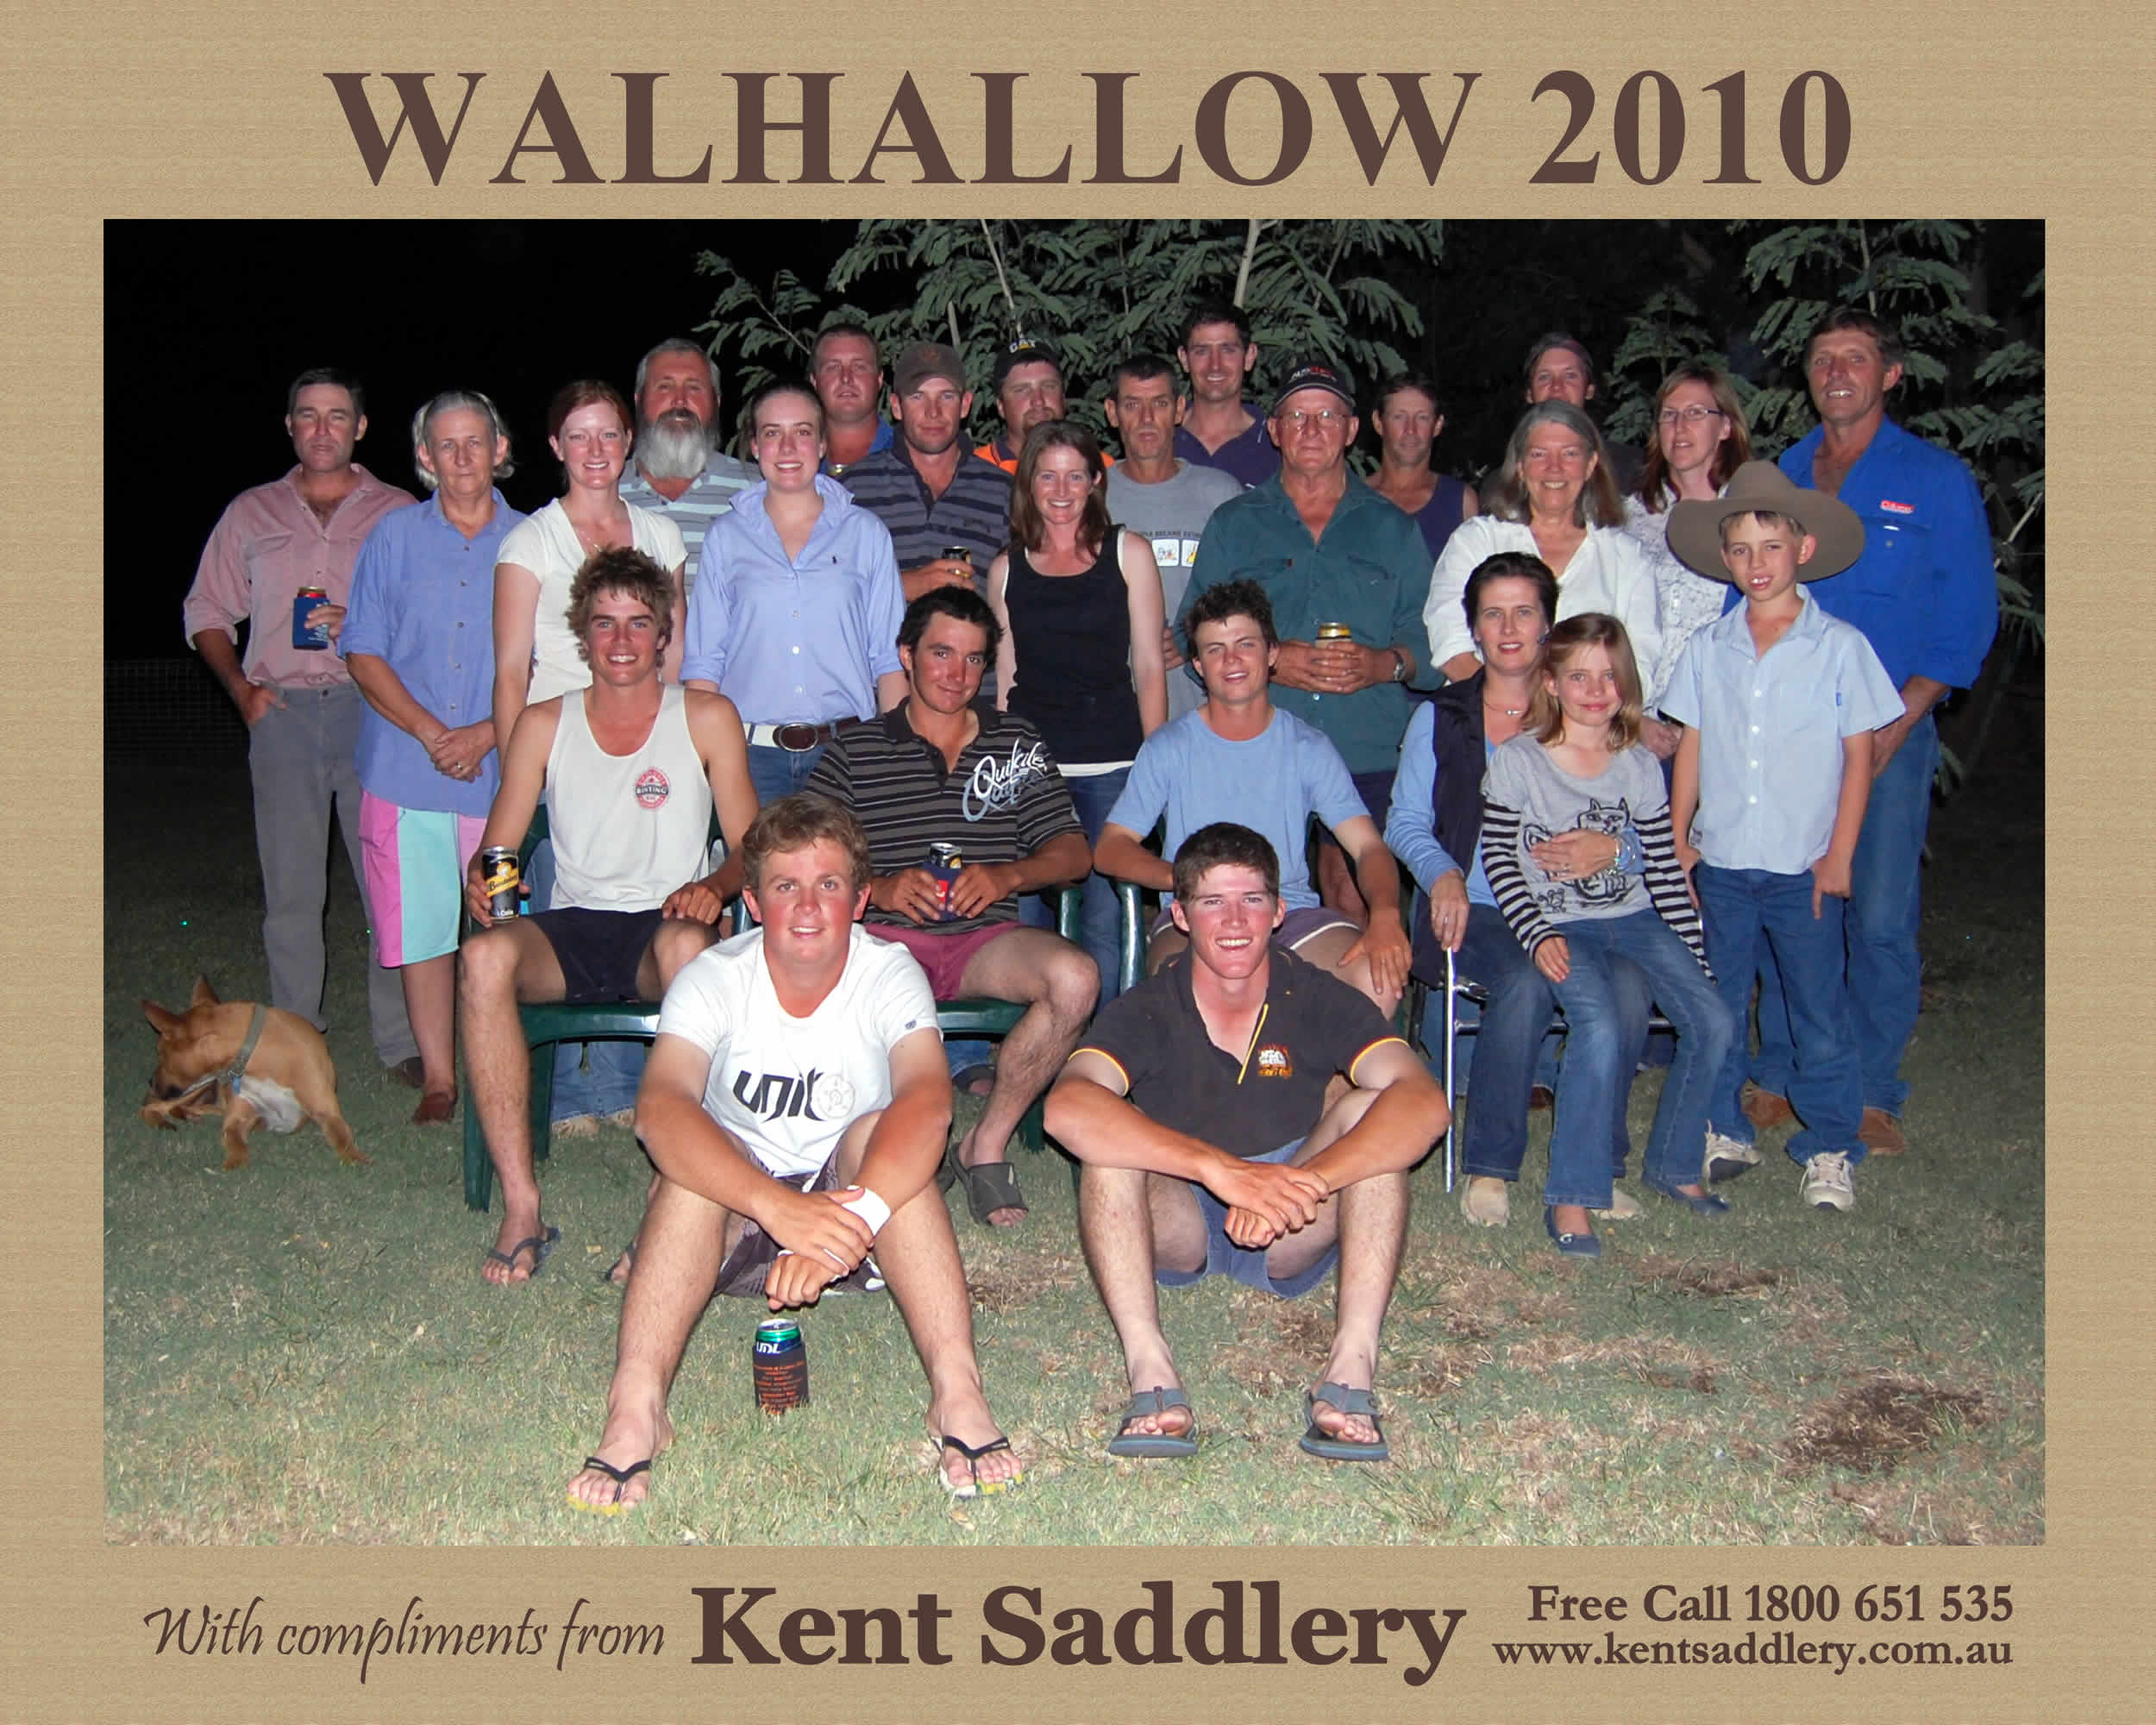 Northern Territory - Walhallow 32